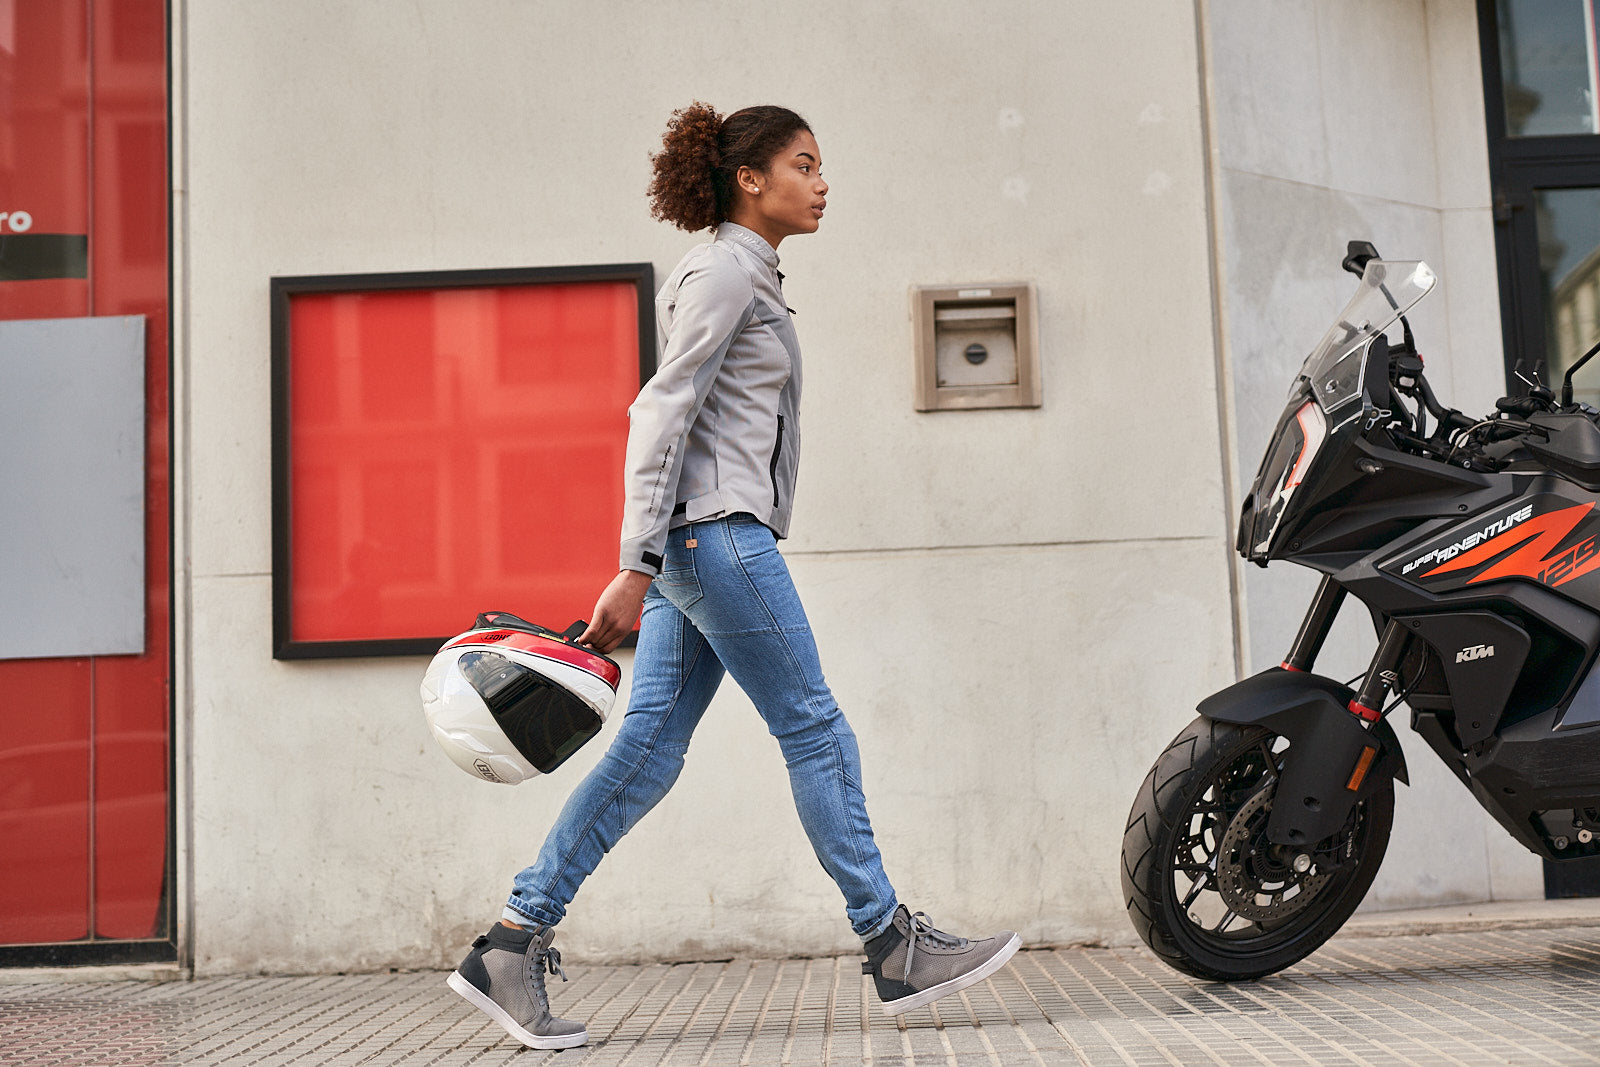 Young woman wearing Light blue motorcycle jeans for women walking towards her motorcycle